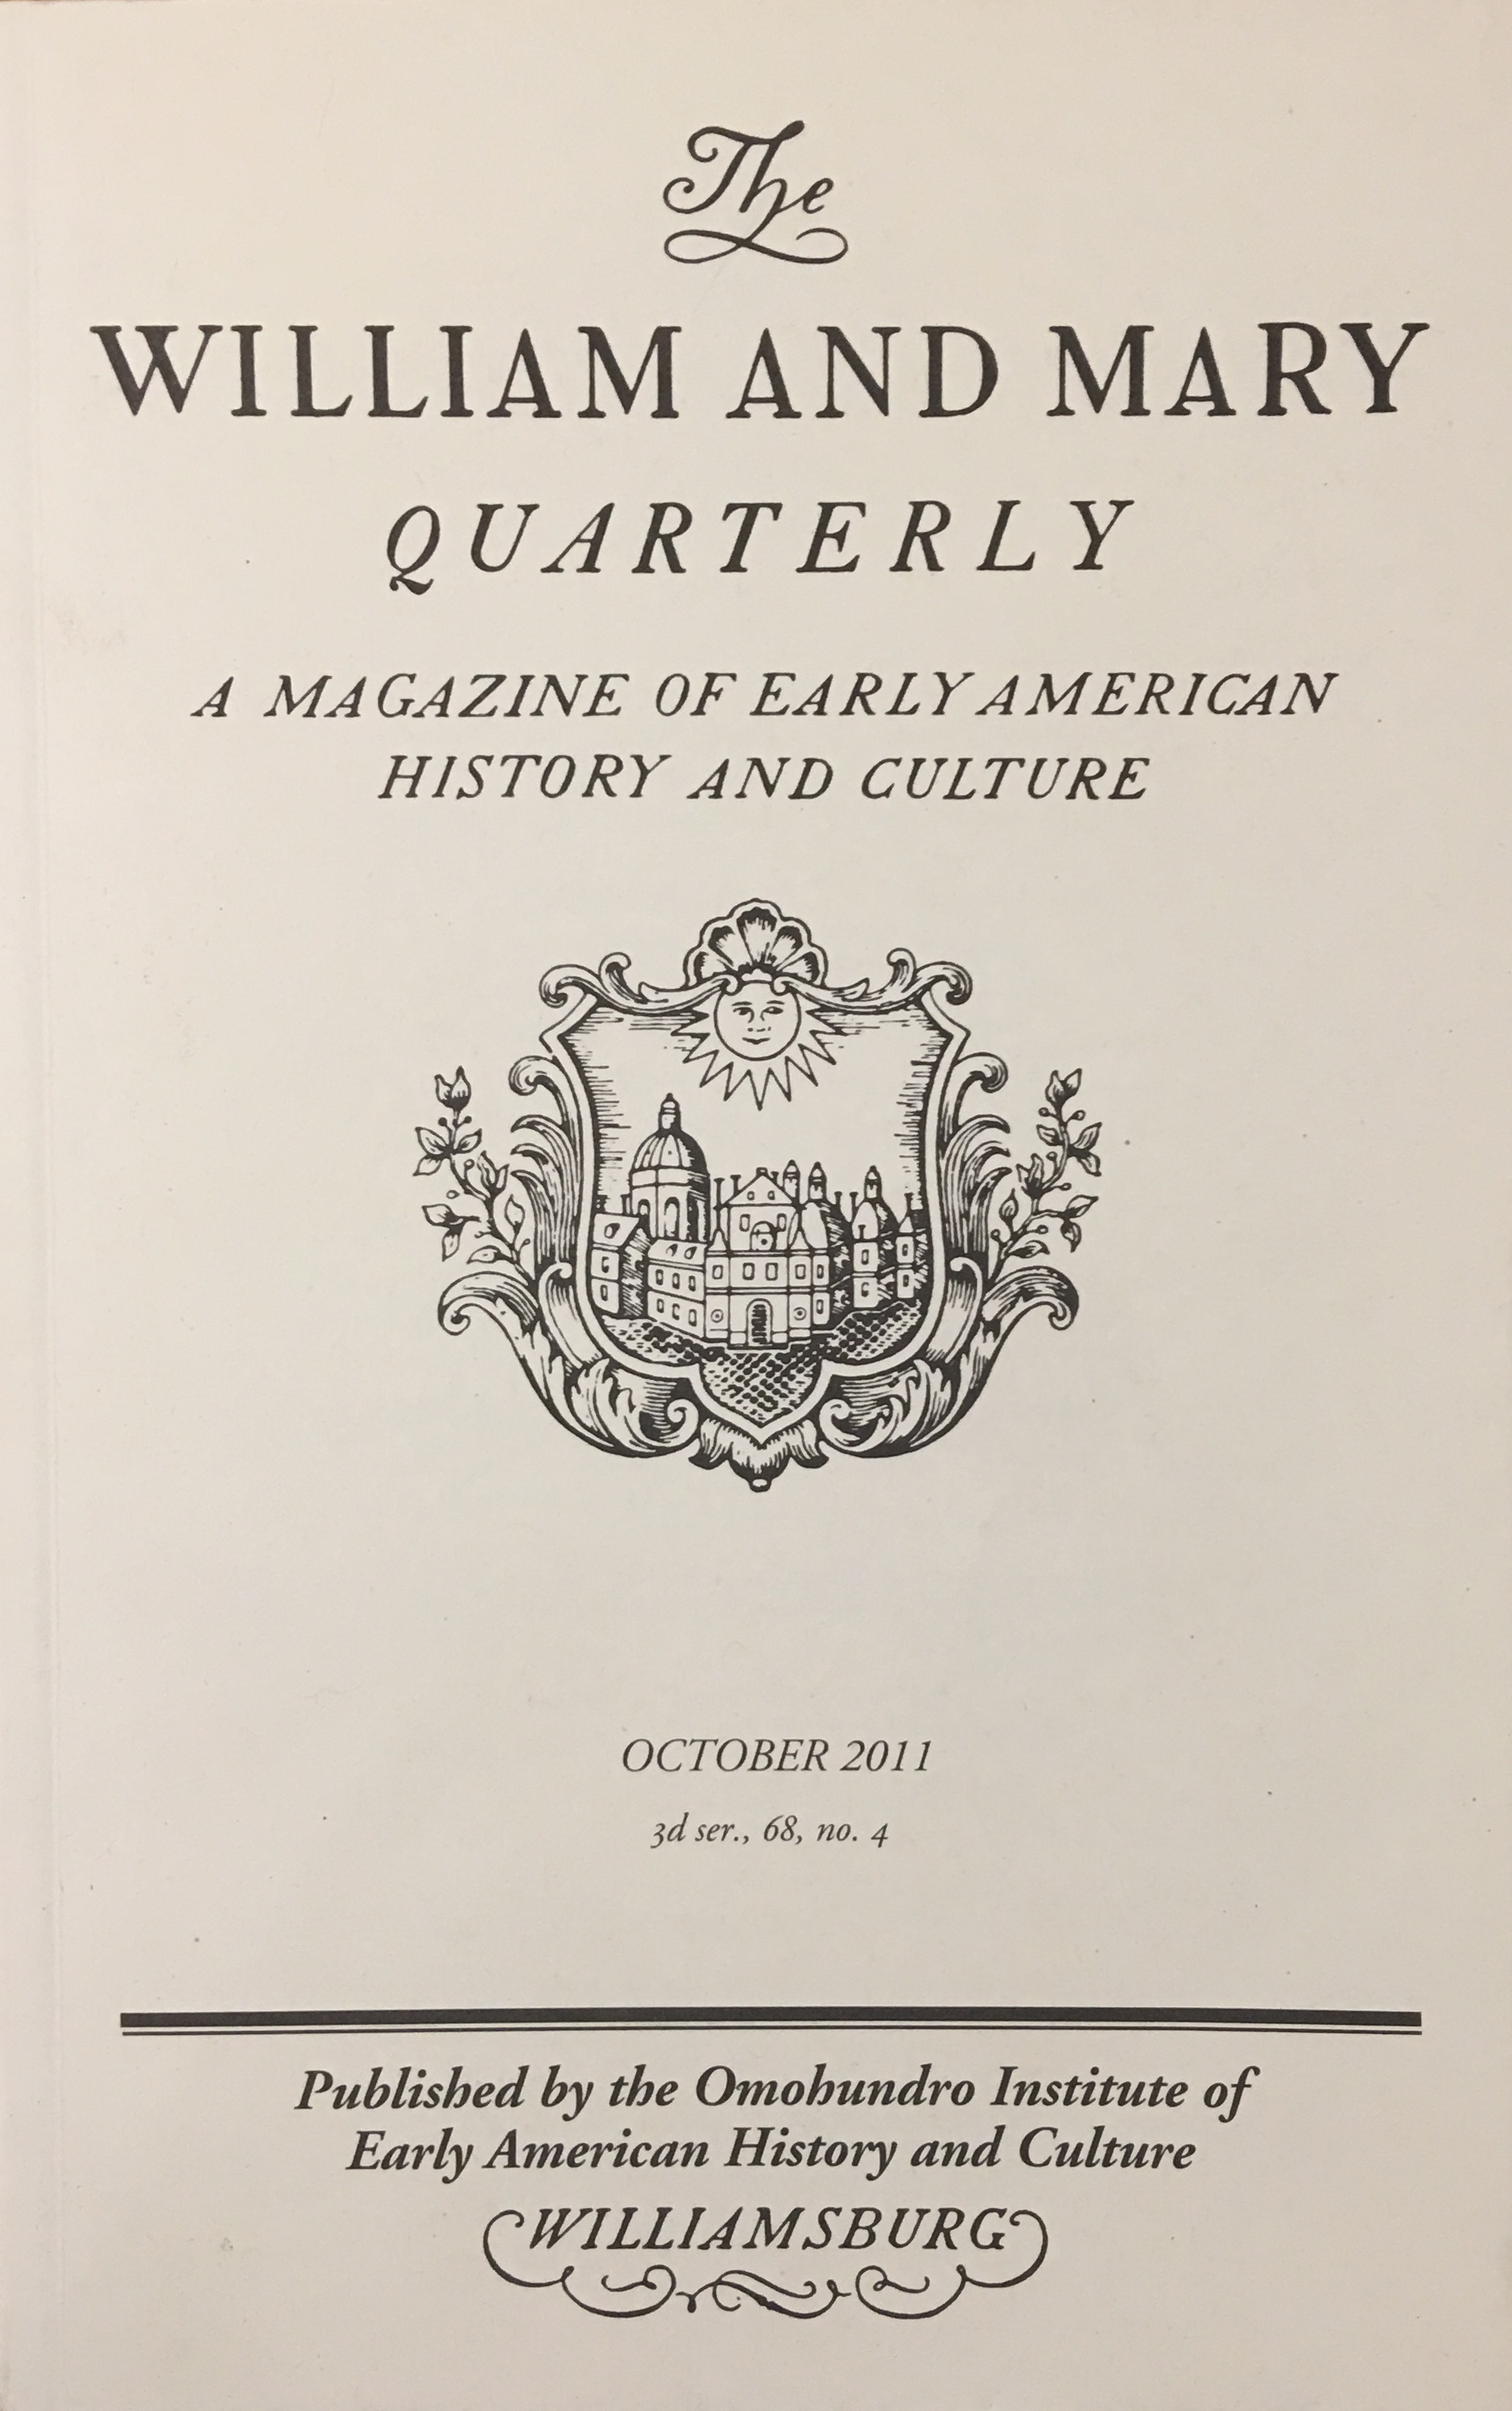 The William and Mary Quarterly — Michael McDonnell, Professor of Early American History